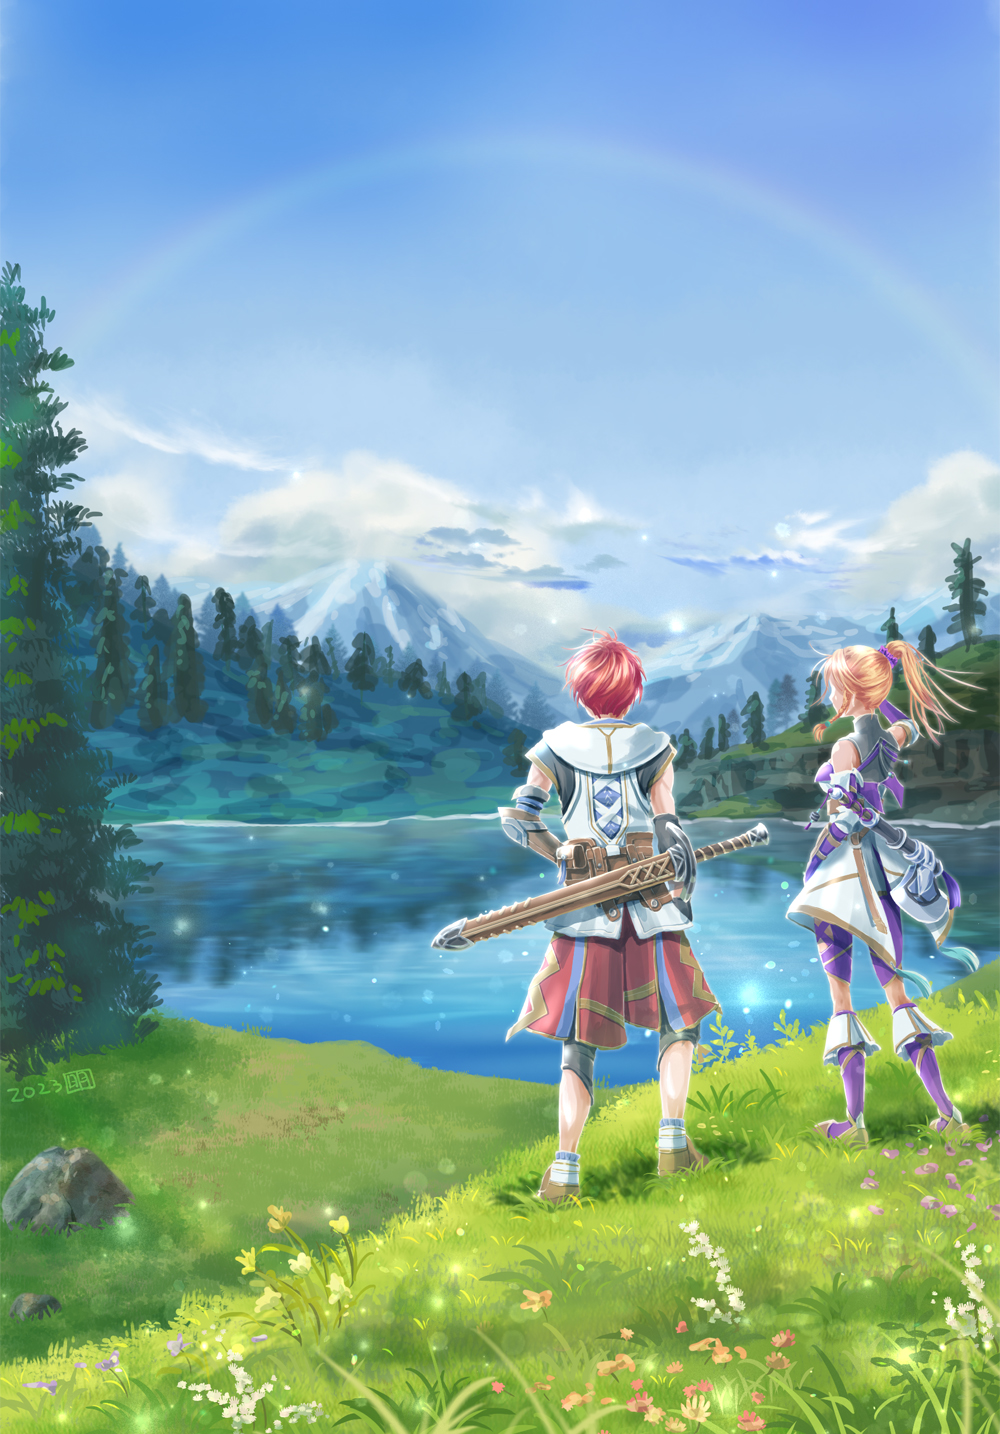 1boy 1girl adol_christin ake_miyamura axe blonde_hair blue_sky cloud commentary_request full_body high_ponytail highres karja_balta mountain on_grass outdoors pond rainbow red_hair rock scenery short_hair sky standing sword sword_on_back tree water weapon weapon_on_back ys ys_x_nordics